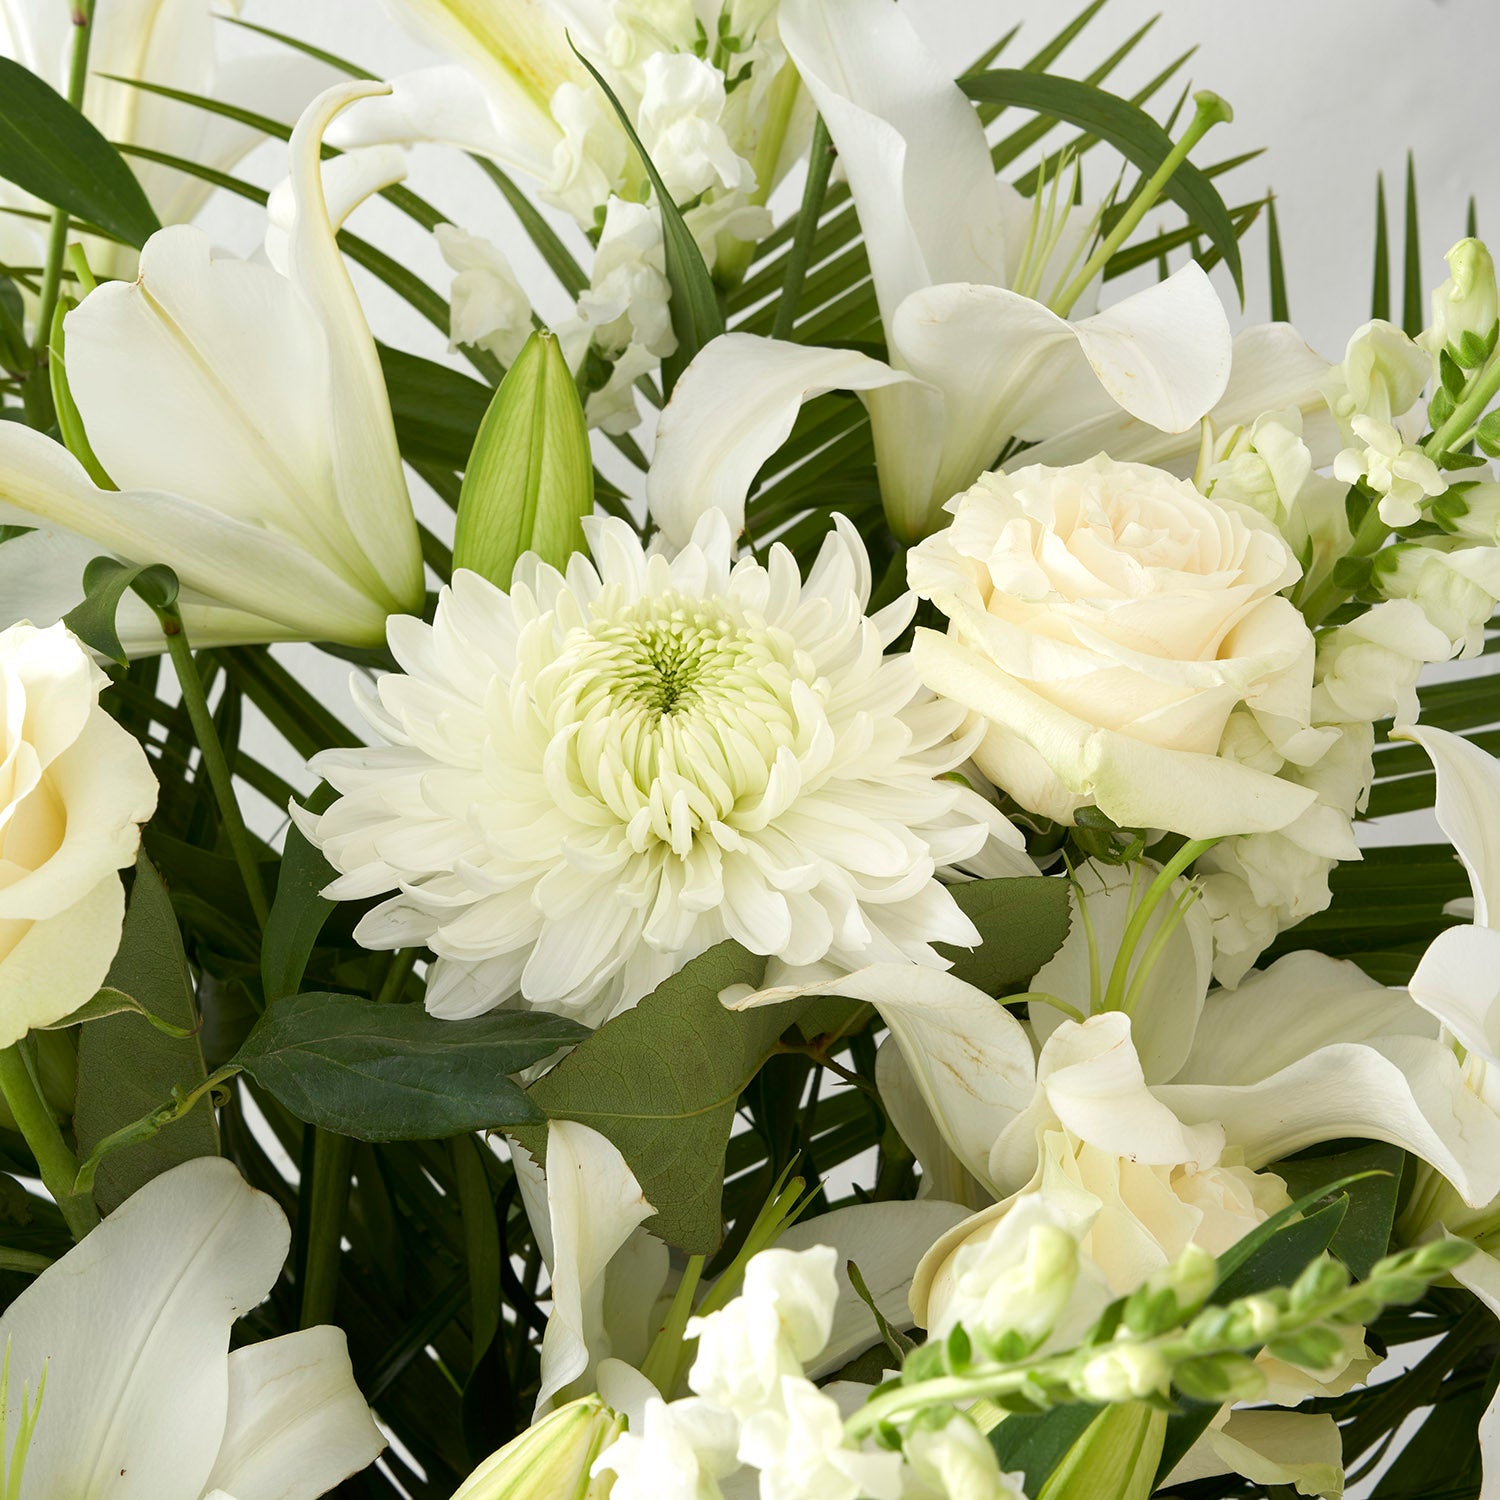 Closeup of white flowers including chrysanthemums, lilies, and roses.